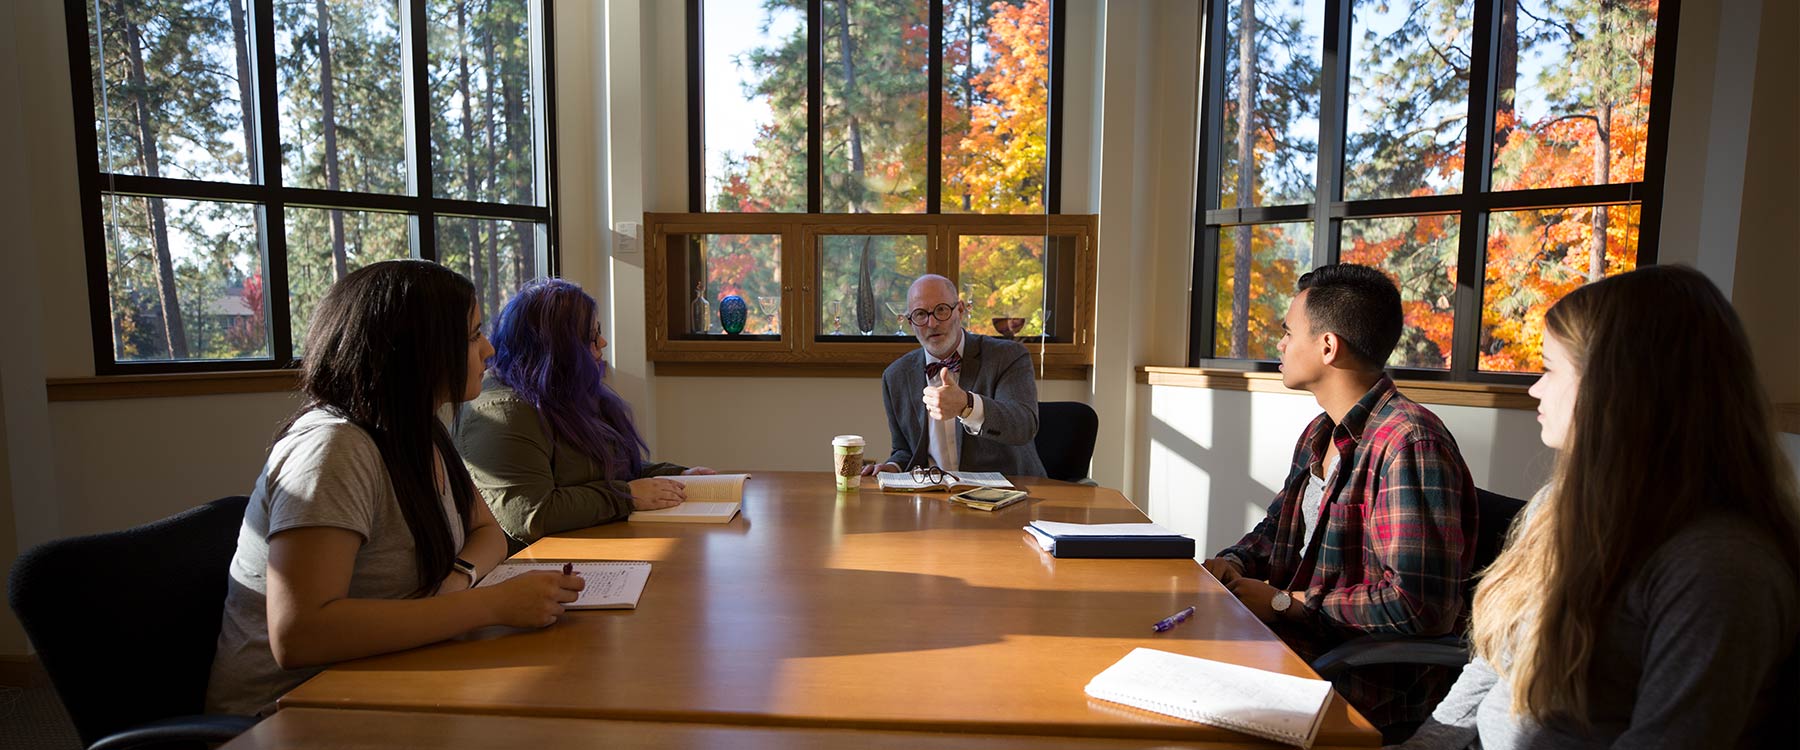 A professor sits at the end of a long table with students on either side listening intently.